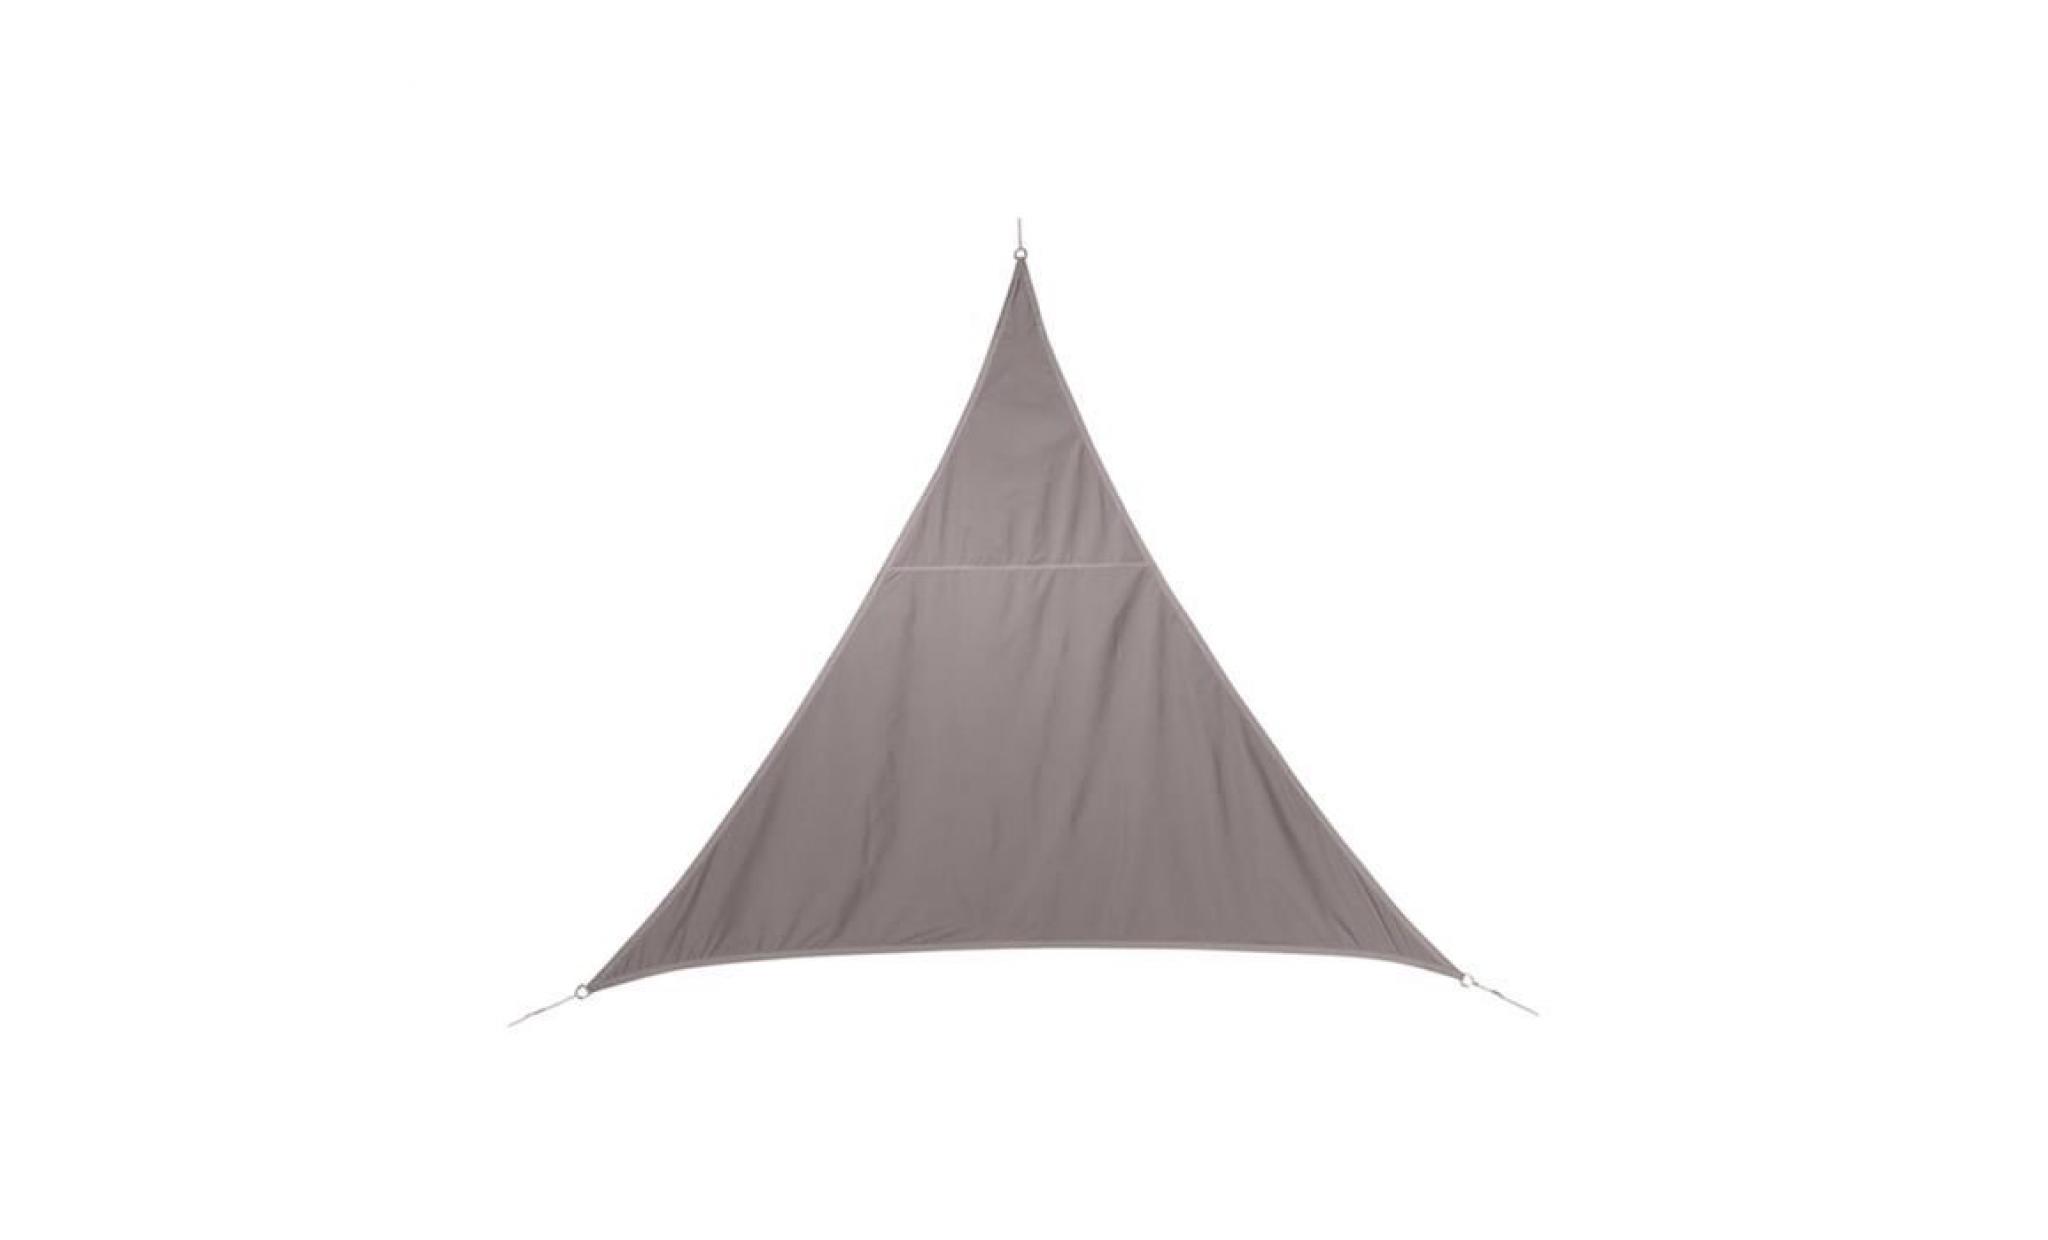 voile d'ombrage en polyester taupe, 400 x 400 x 400 cm